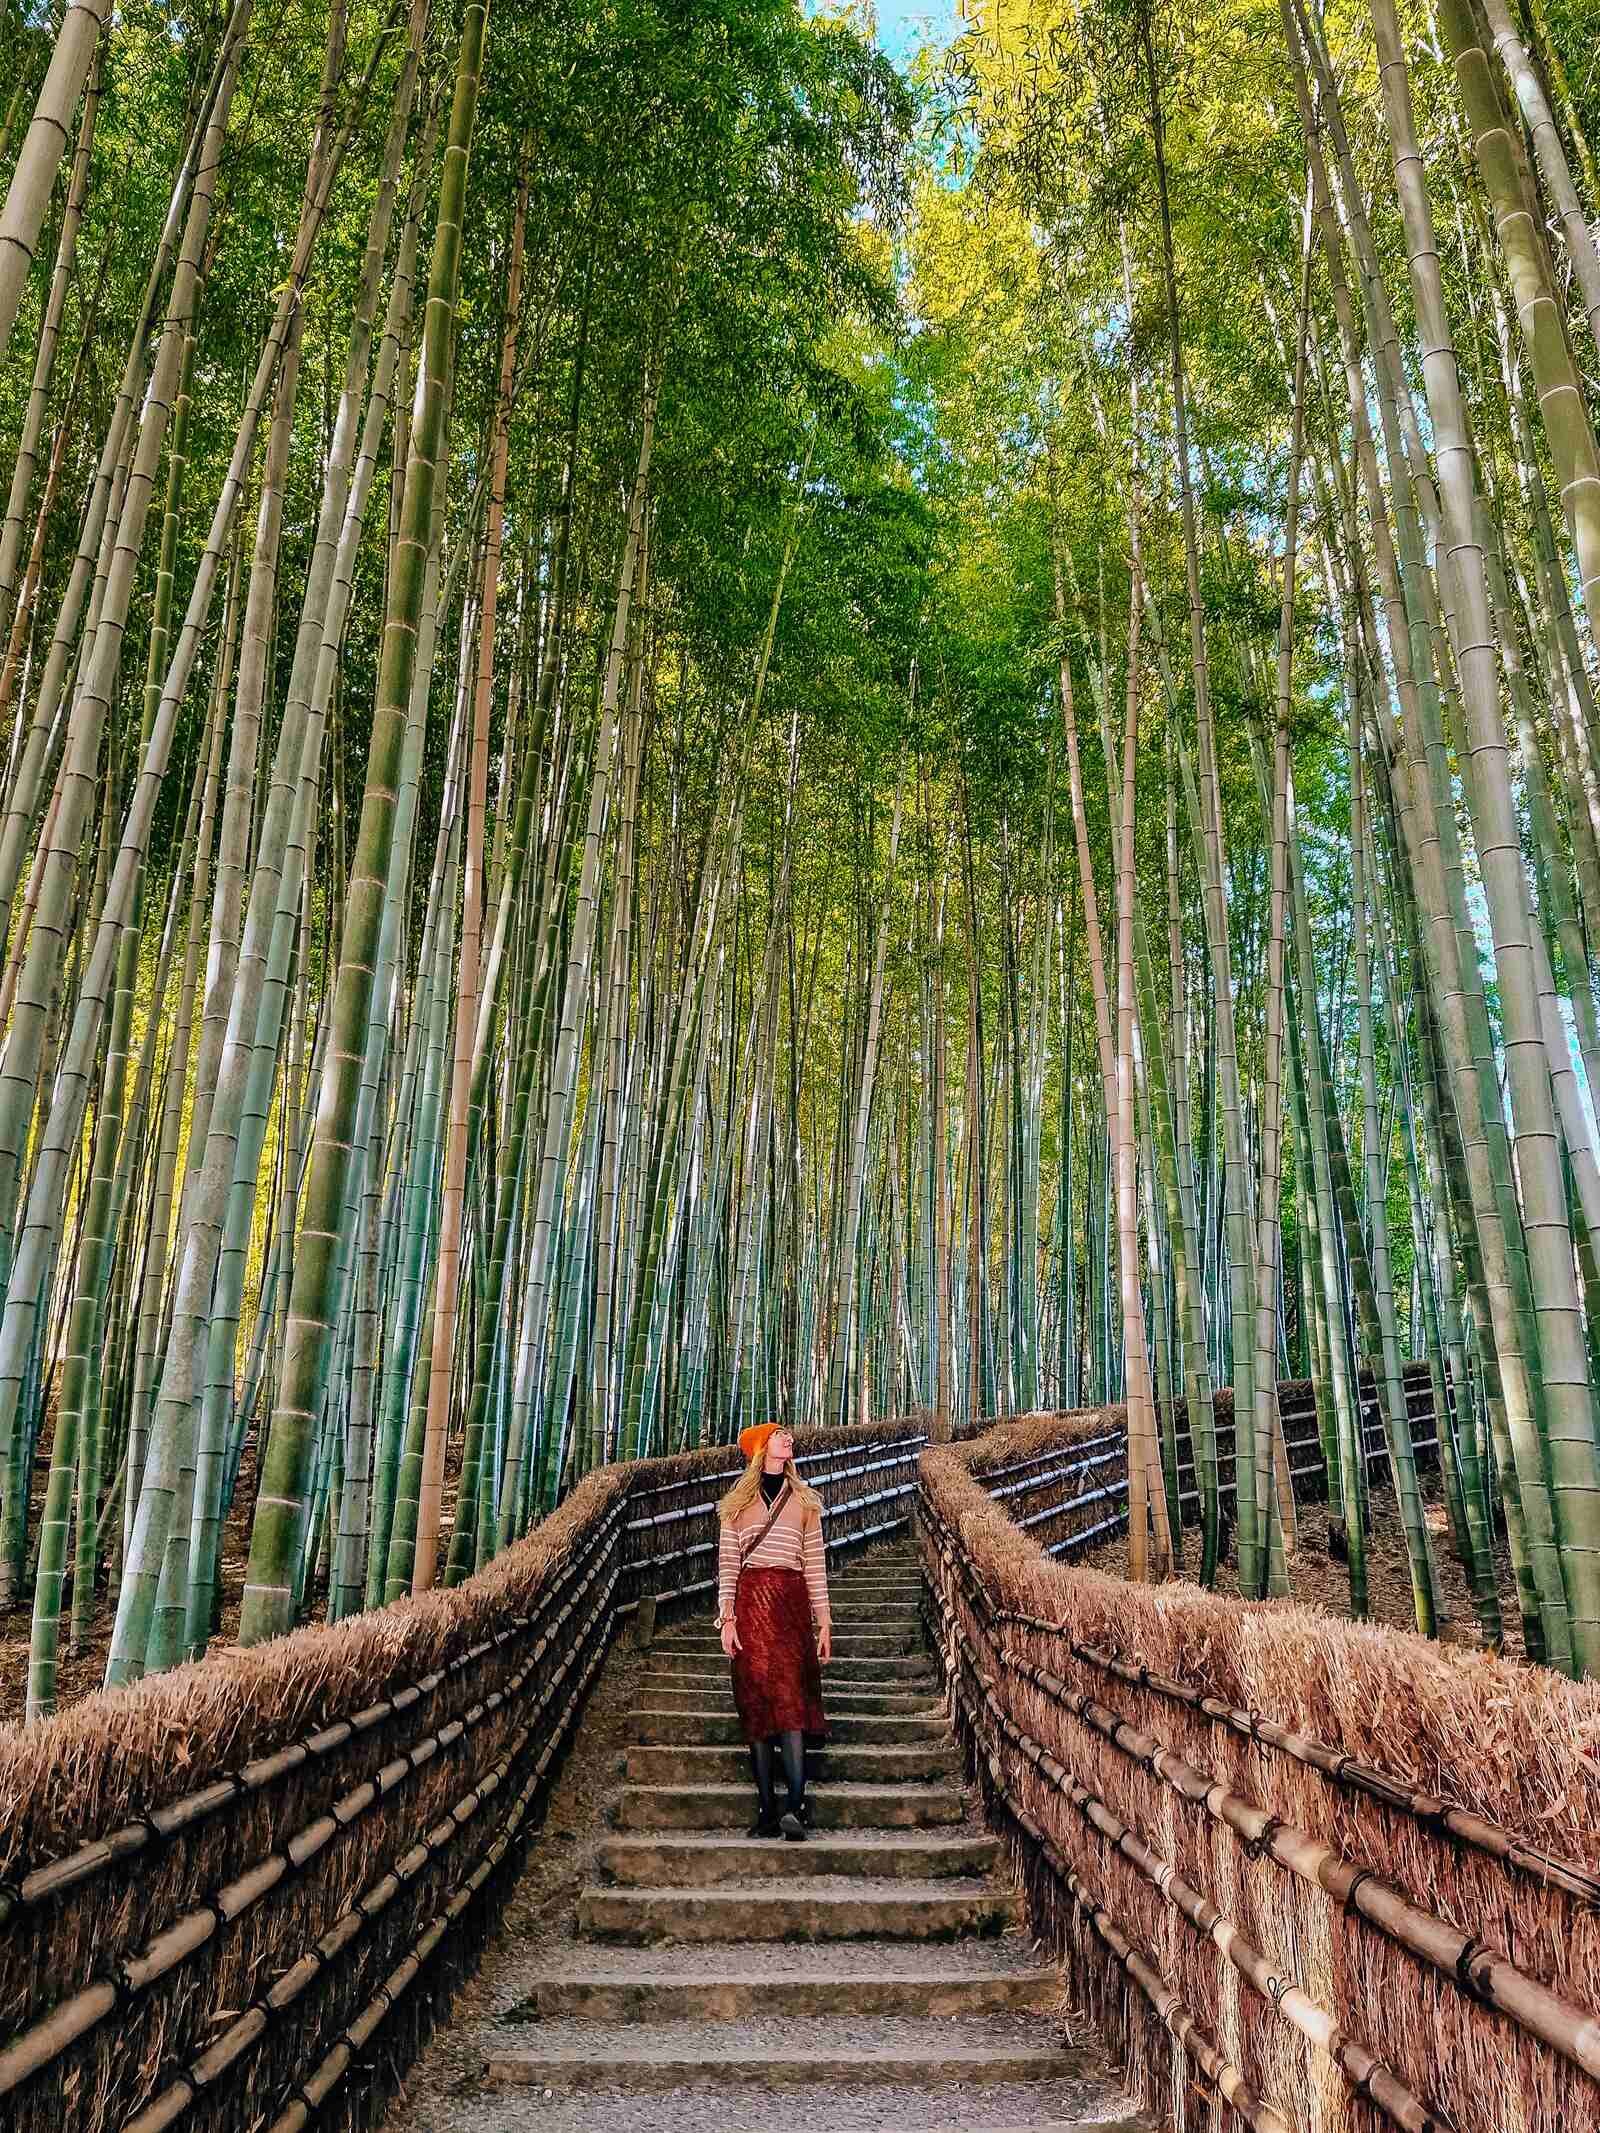 Helena standing on steps surrounded by tall, green bamboo